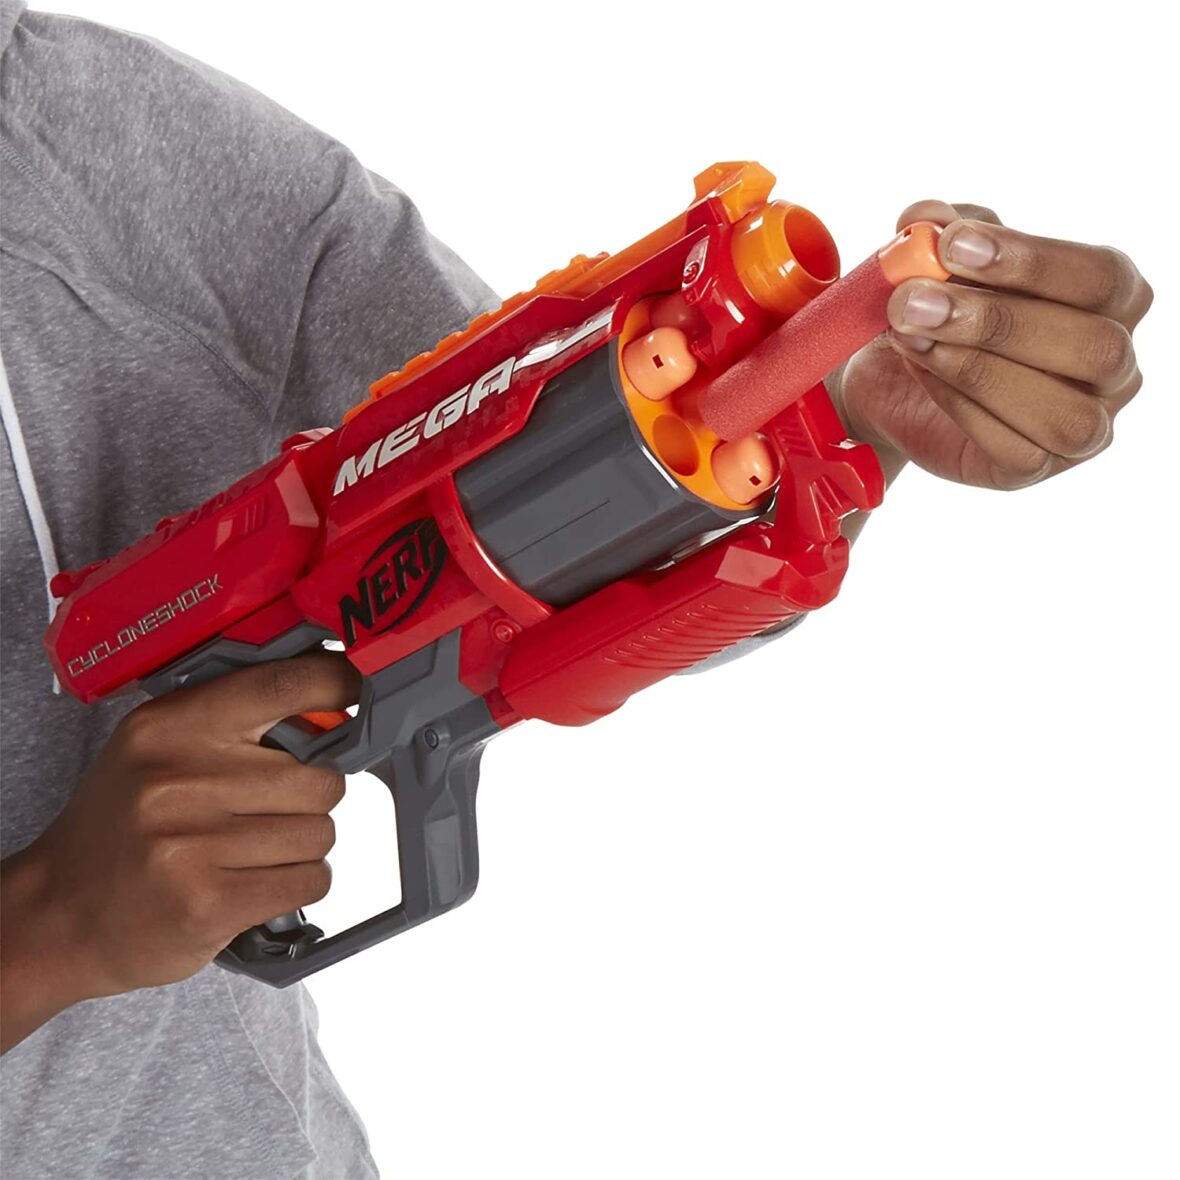 NERF N-Strike Plastic Mega CycloneShock, Includes Blaster and 6 Darts, for Kids Ages 8 and Up, Multicolor